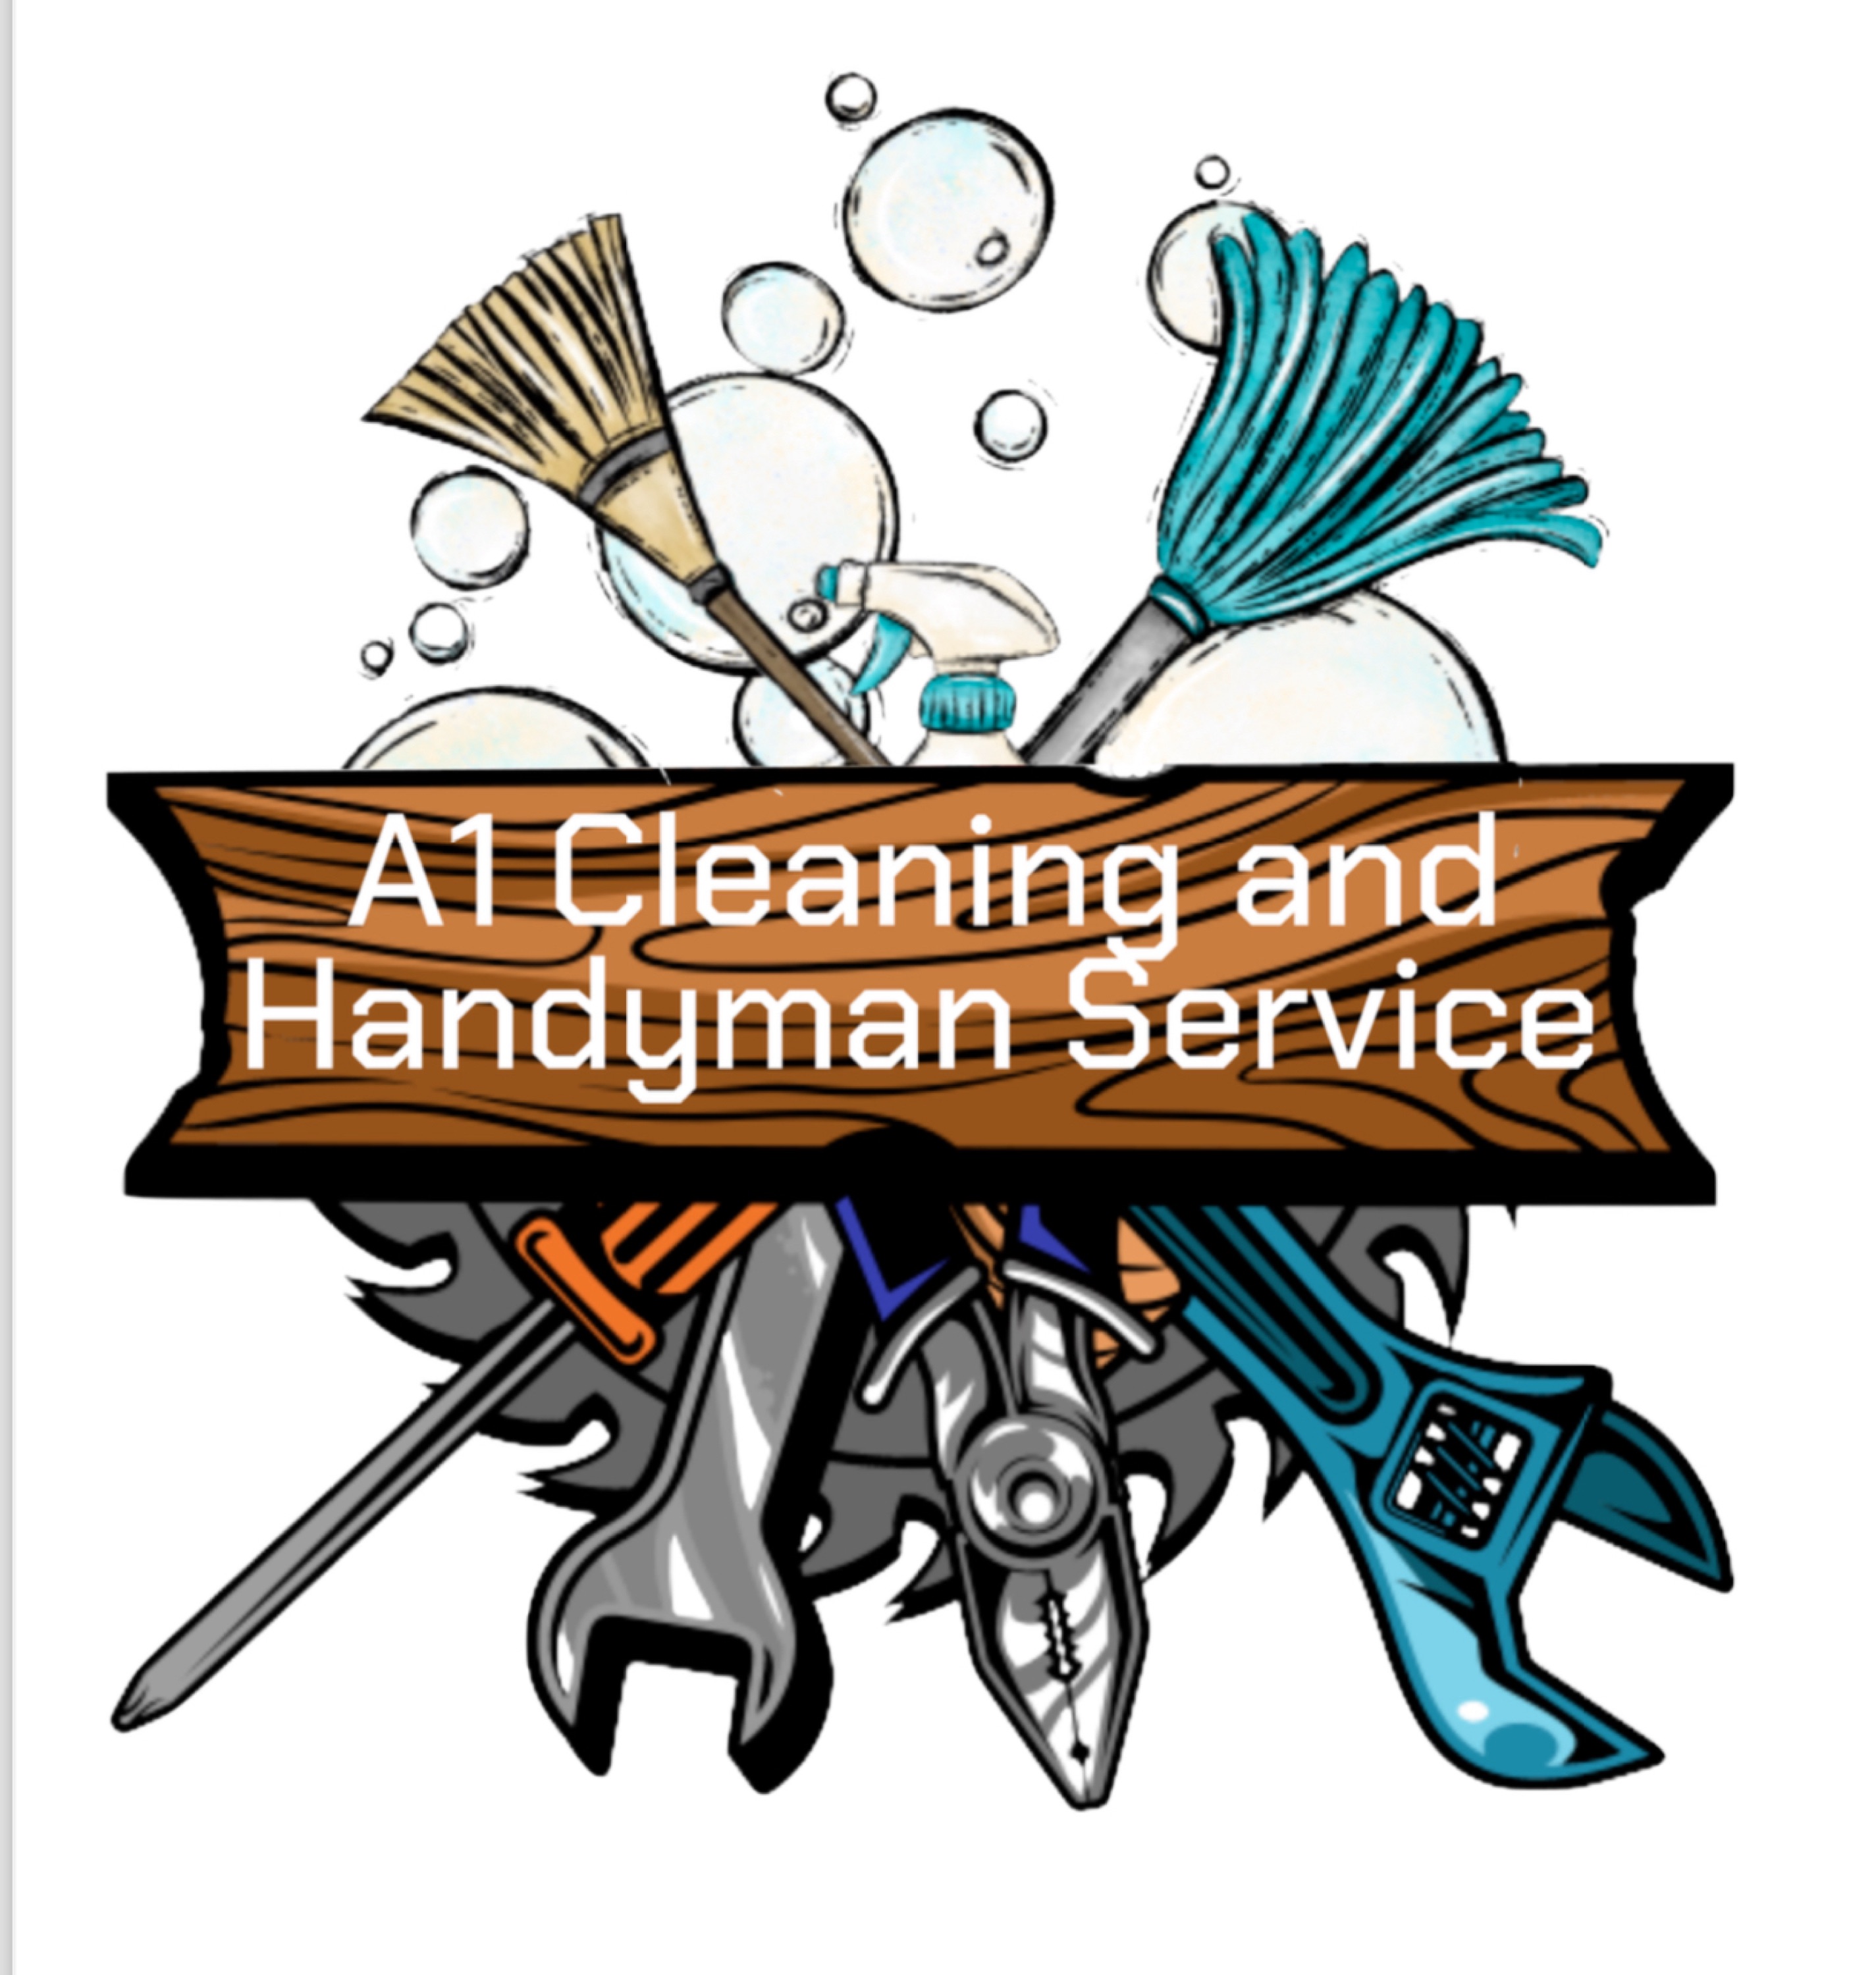 A1 cleaning and handyman service Logo